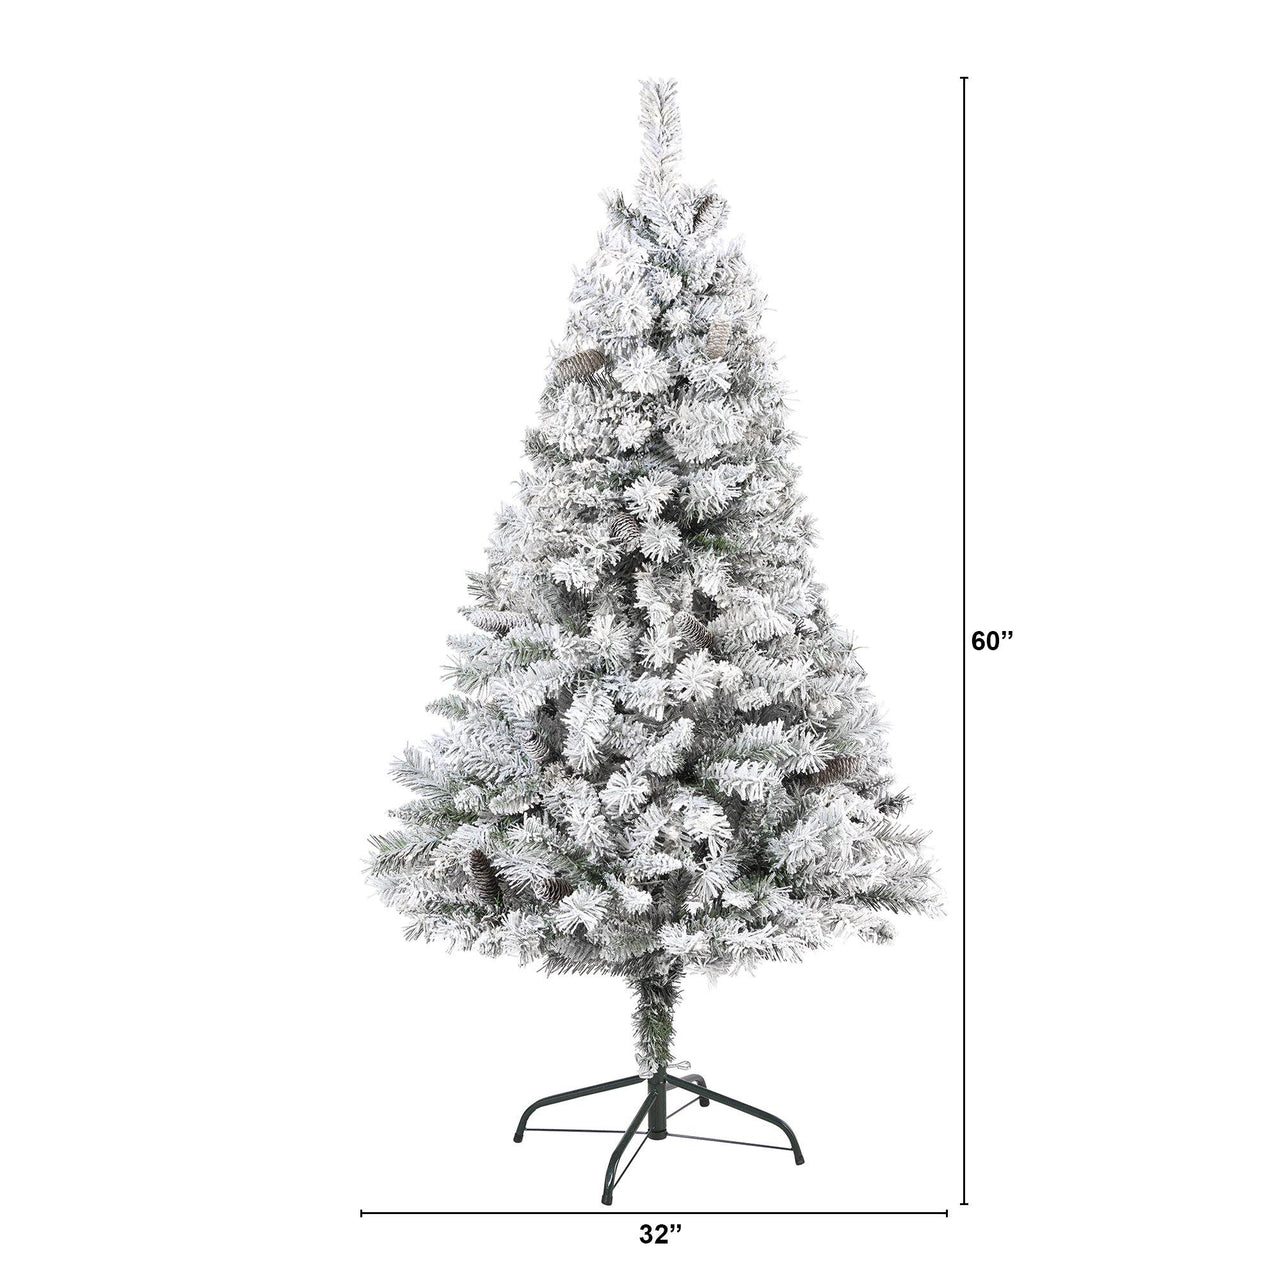 5' Flocked White River Mountain Pine Artificial Christmas Tree with Pinecones - The Fox Decor